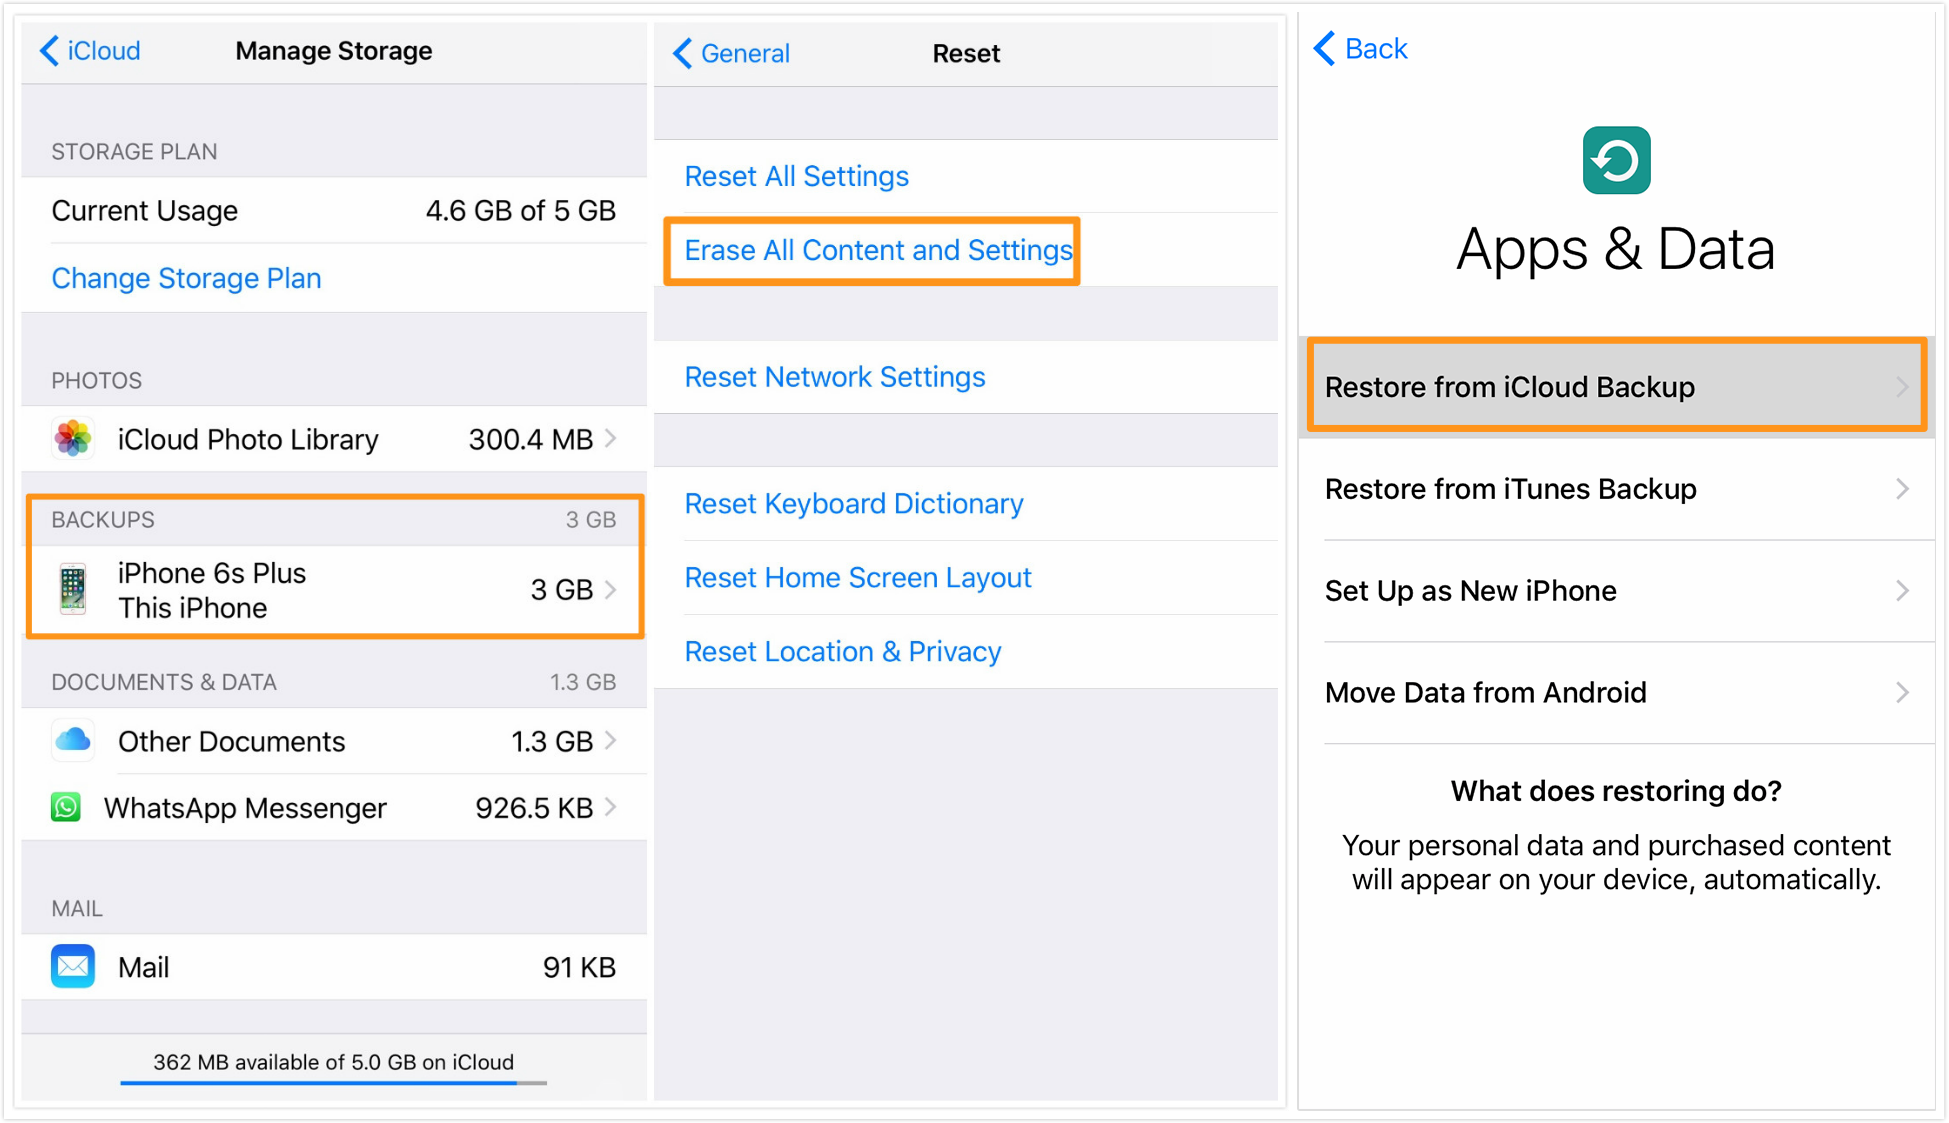 Recover Deleted Messages on iPhone by Restoring iCloud Backup